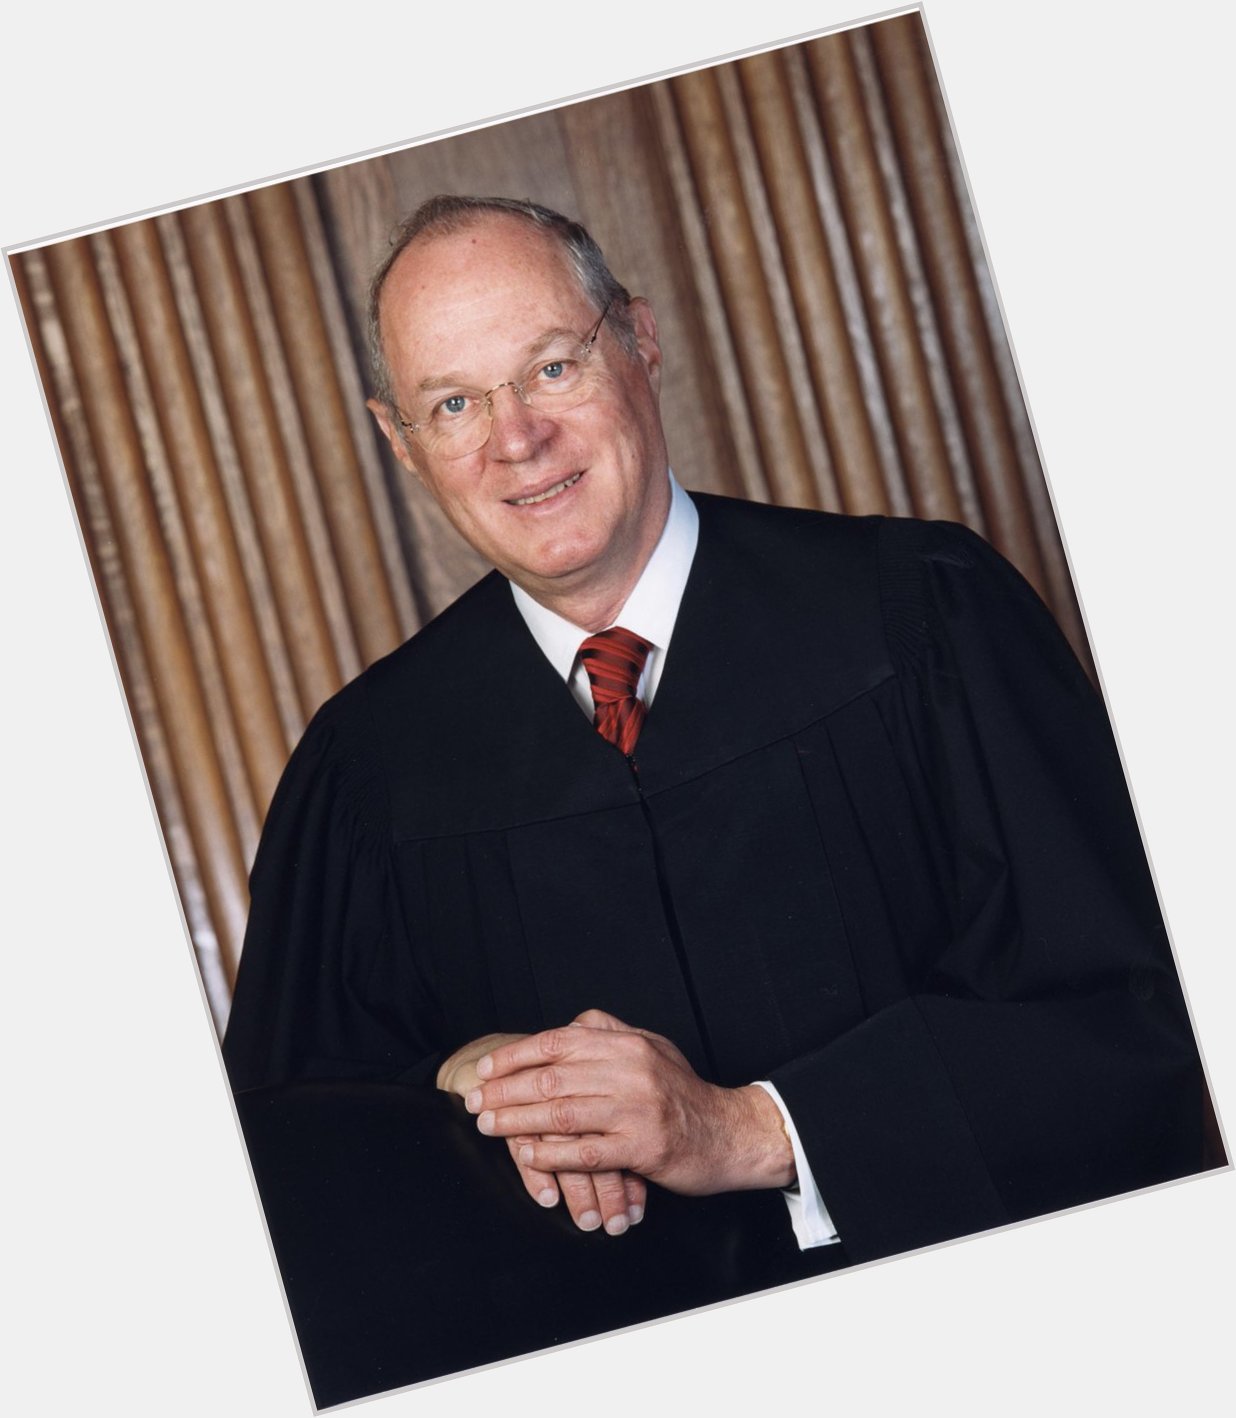 Happy birthday to Supreme Court Justice Anthony Kennedy! He was nominated to the Supreme Court in 1987. 